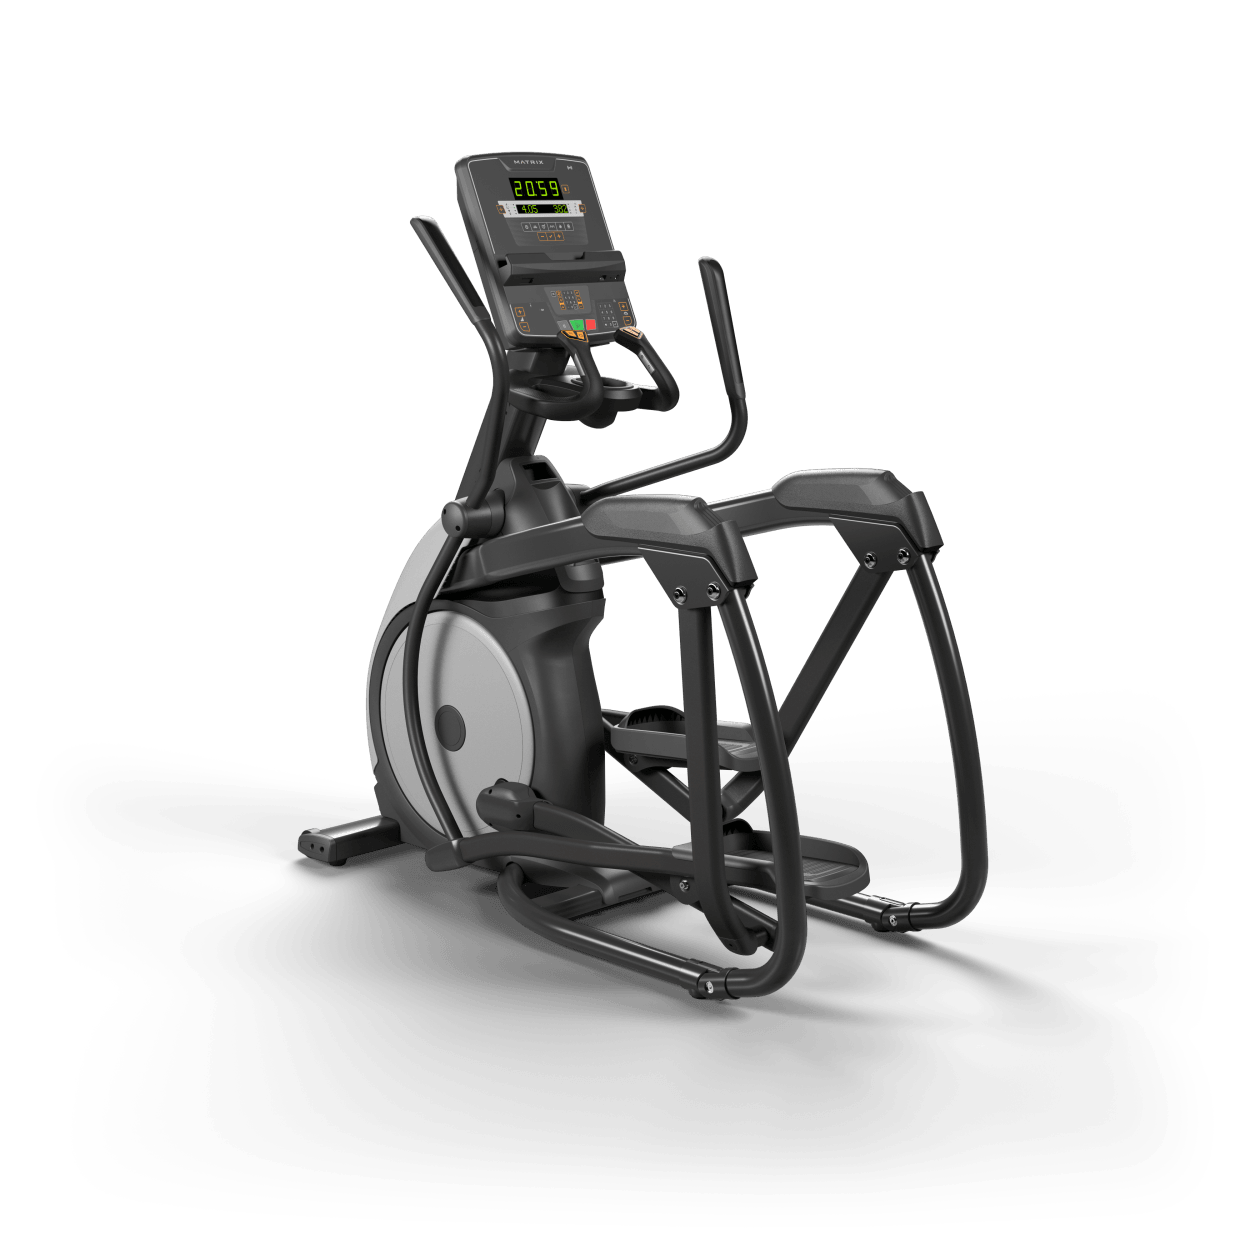 Matrix Fitness Performance Elliptical with LED Console full view | Fitness Experience